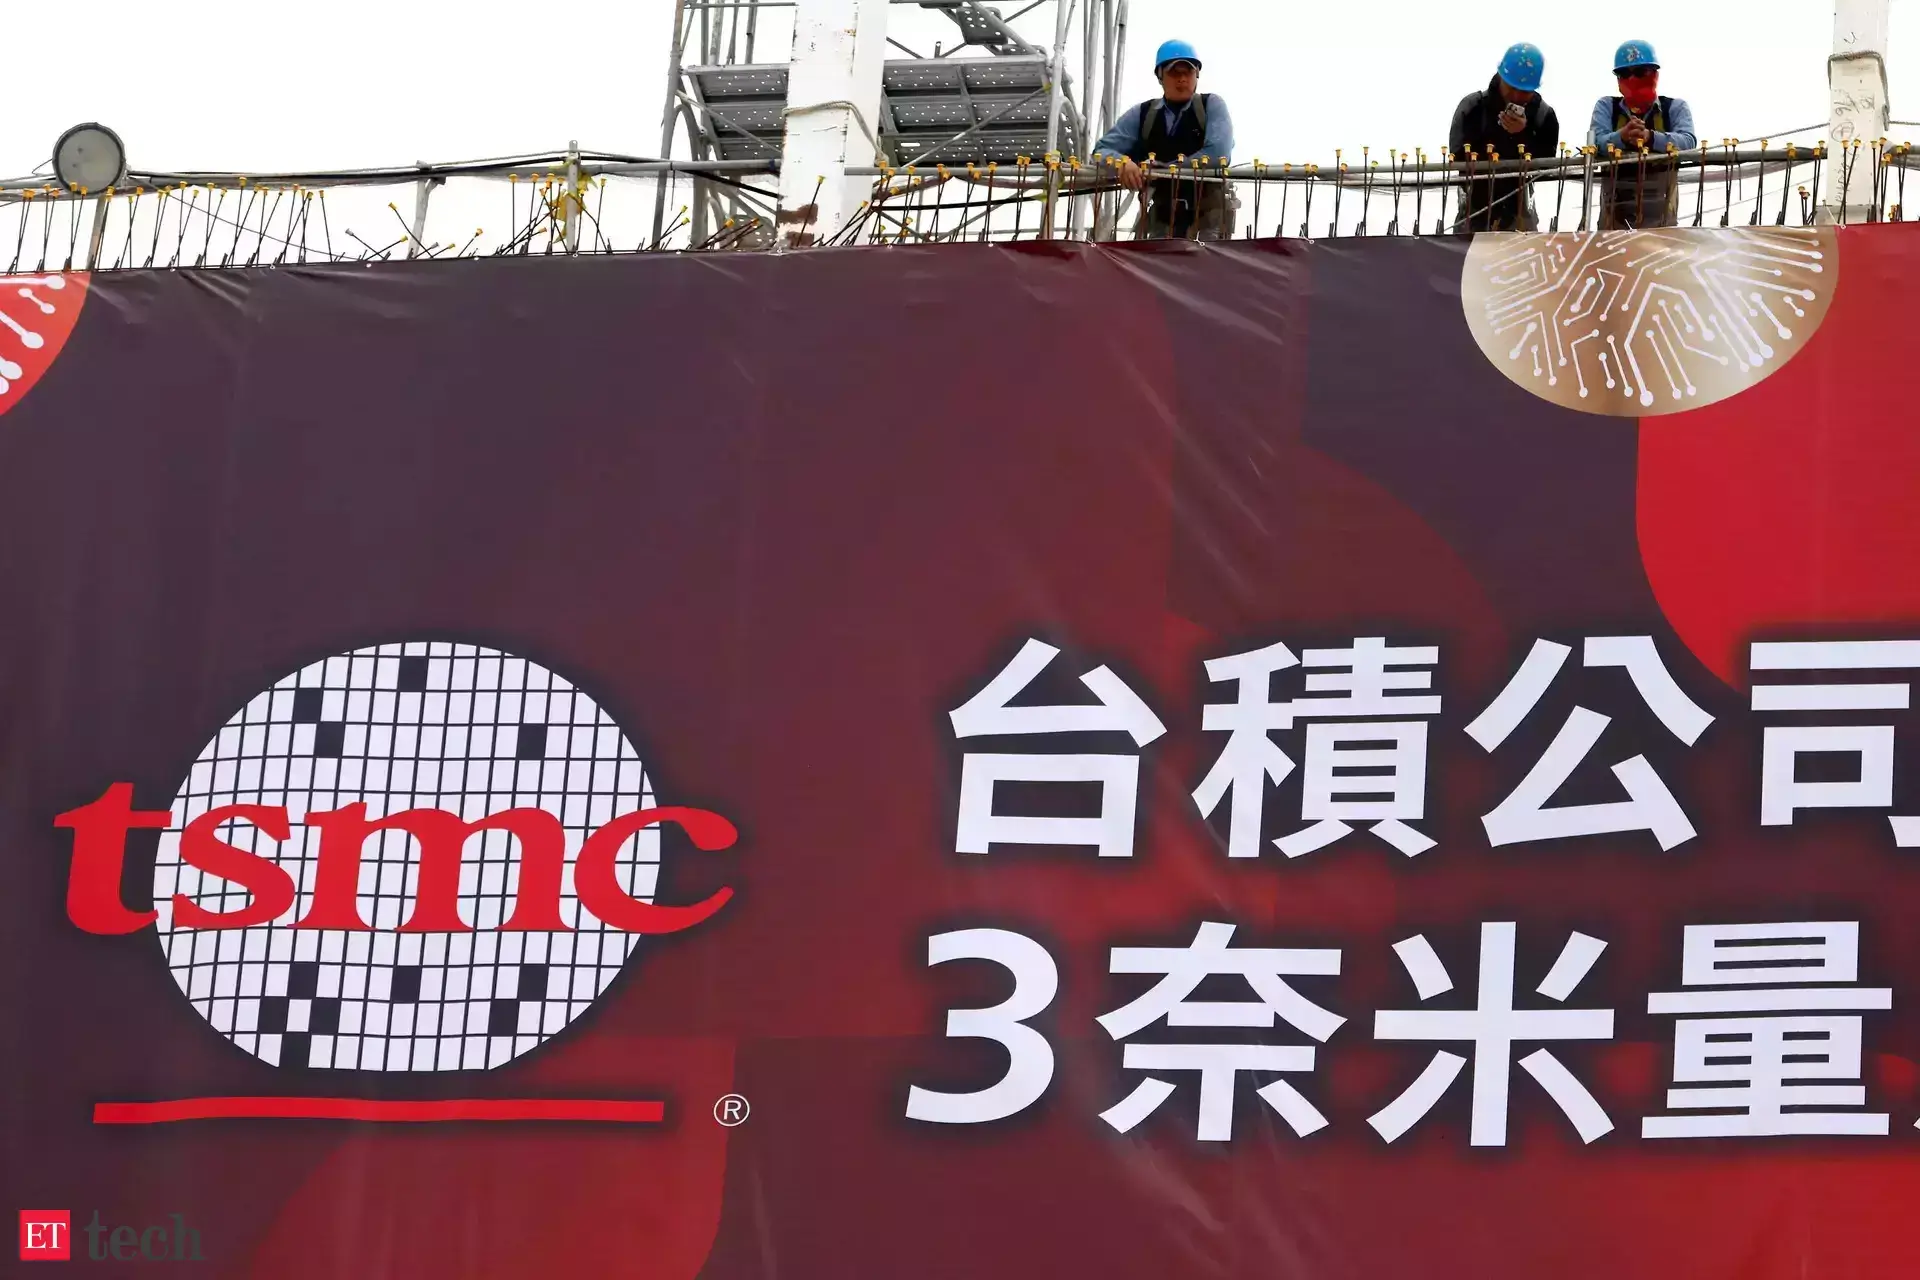 Driven by AI boom, TSMC to invest $2.9 billion in advanced chip plant in Taiwan